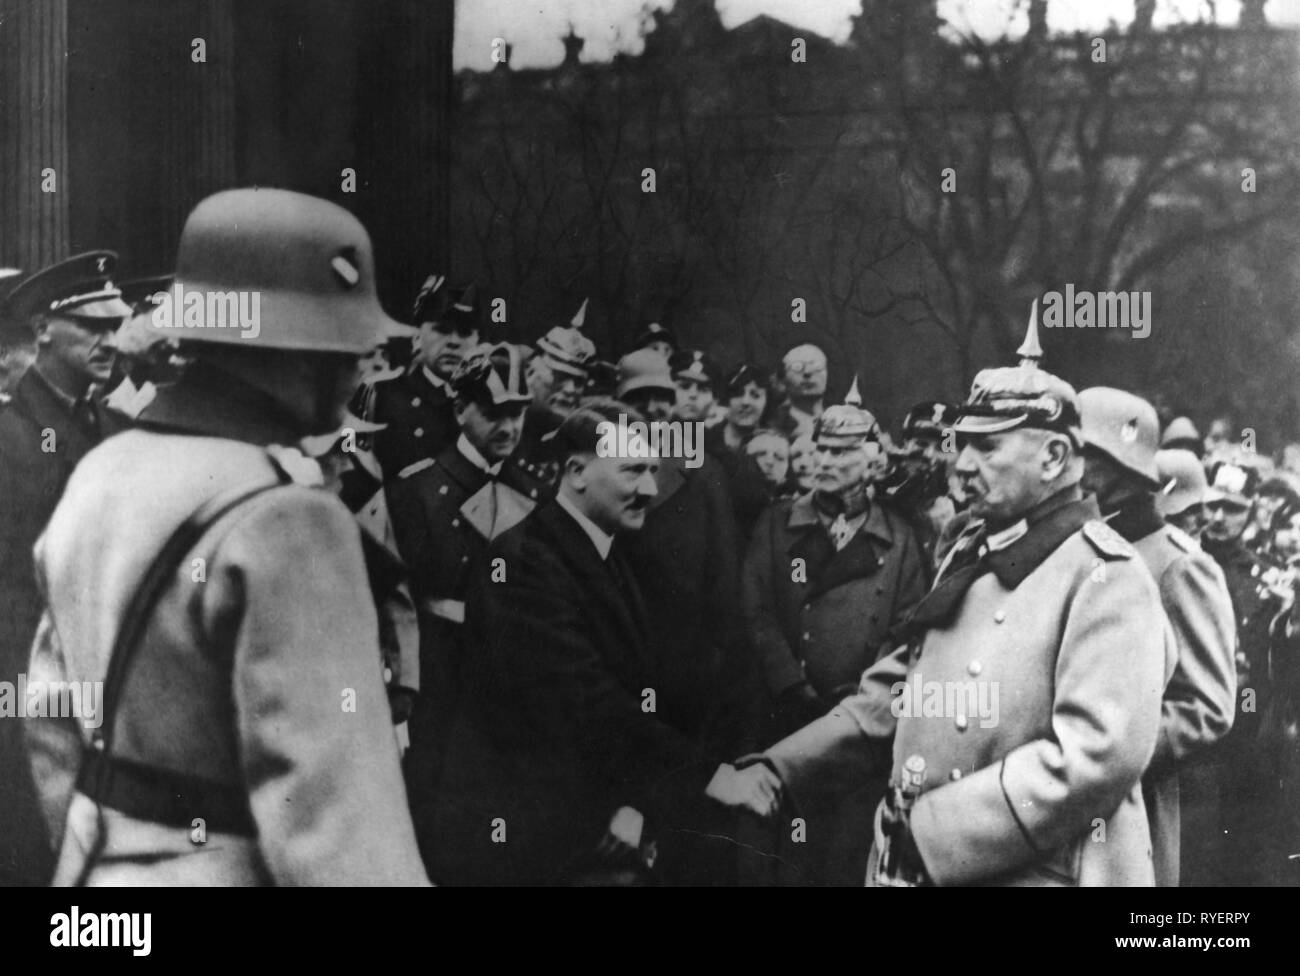 Nazism / National Socialism, event, celebration of Memorial Day, Chancellor of the Reich Adolf Hitler is greeting President of the Reich Paul von Hindenburg, Neue Wache, Unter den Linden, Berlin, 24.2.1934, Additional-Rights-Clearance-Info-Not-Available Stock Photo